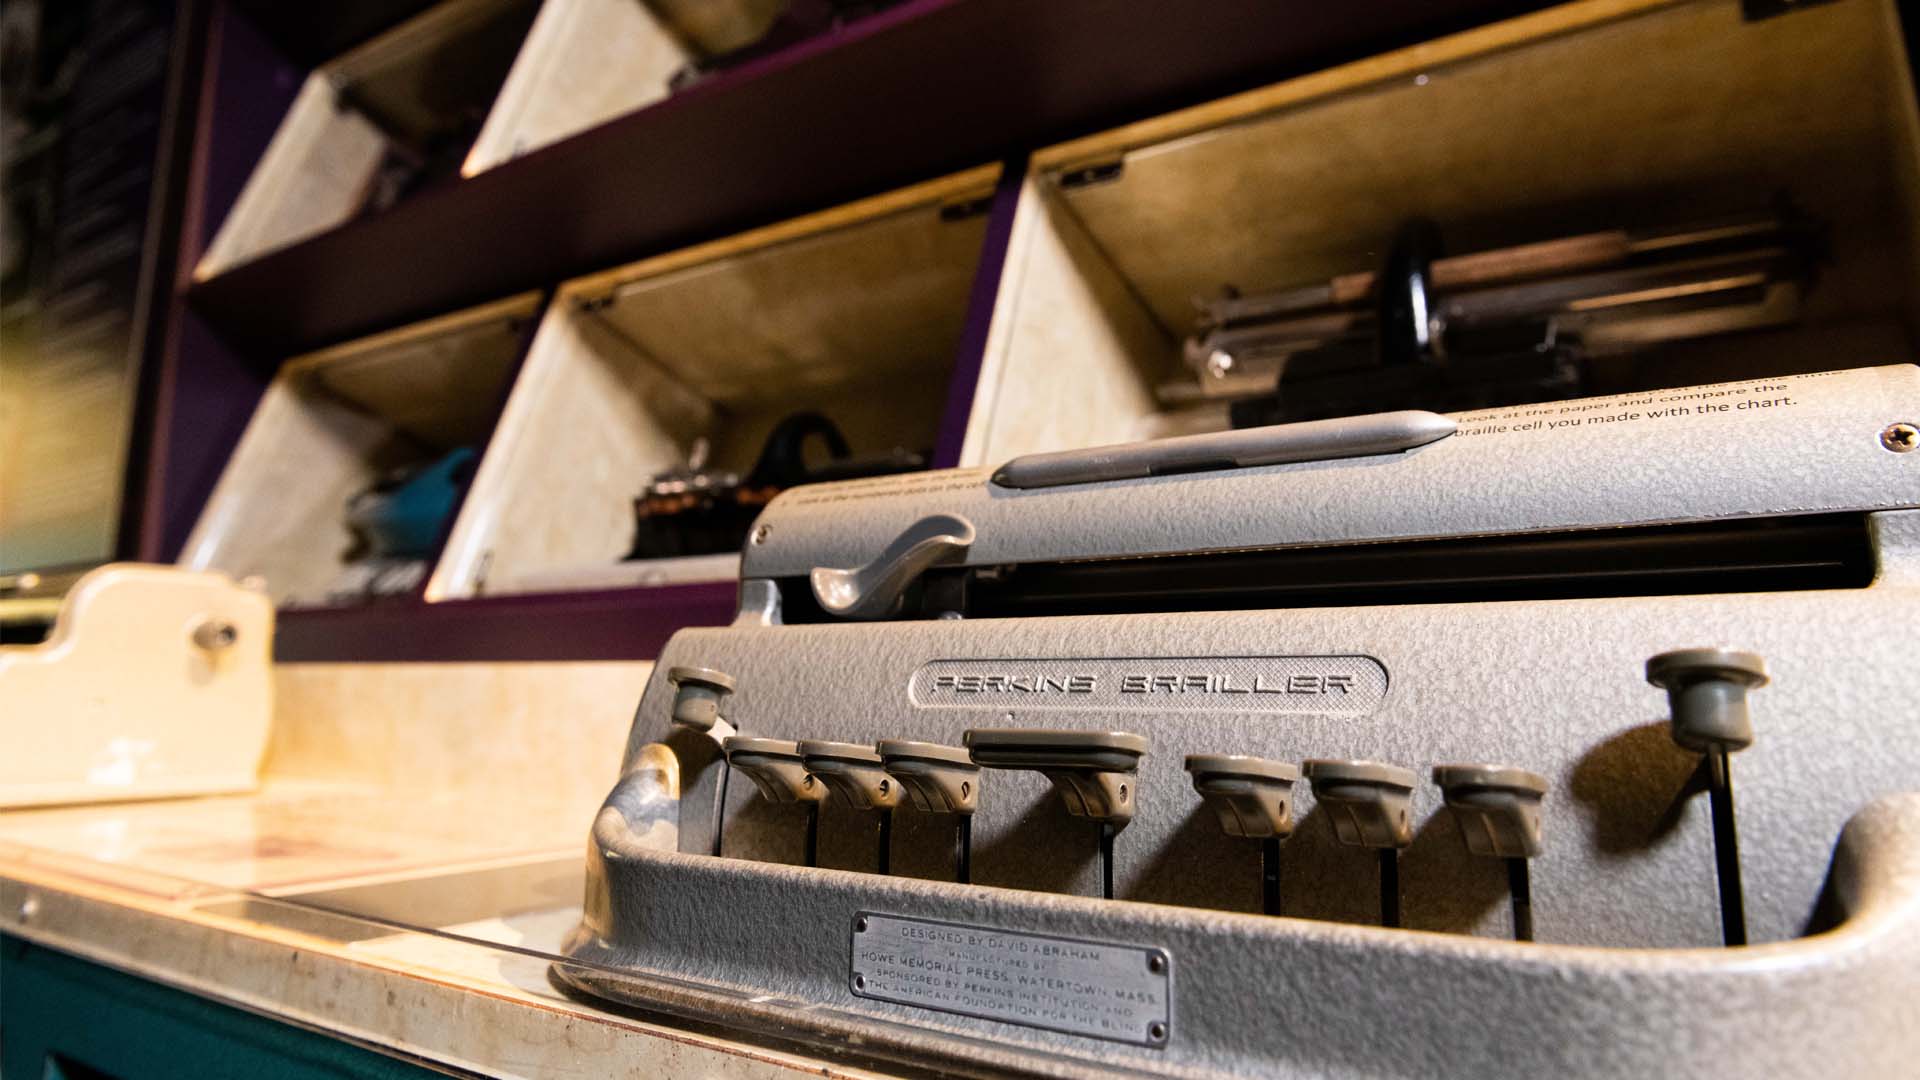 Closeup view of the keyboard of a Perkins Brailler in front of a case full of other historic braillewriters